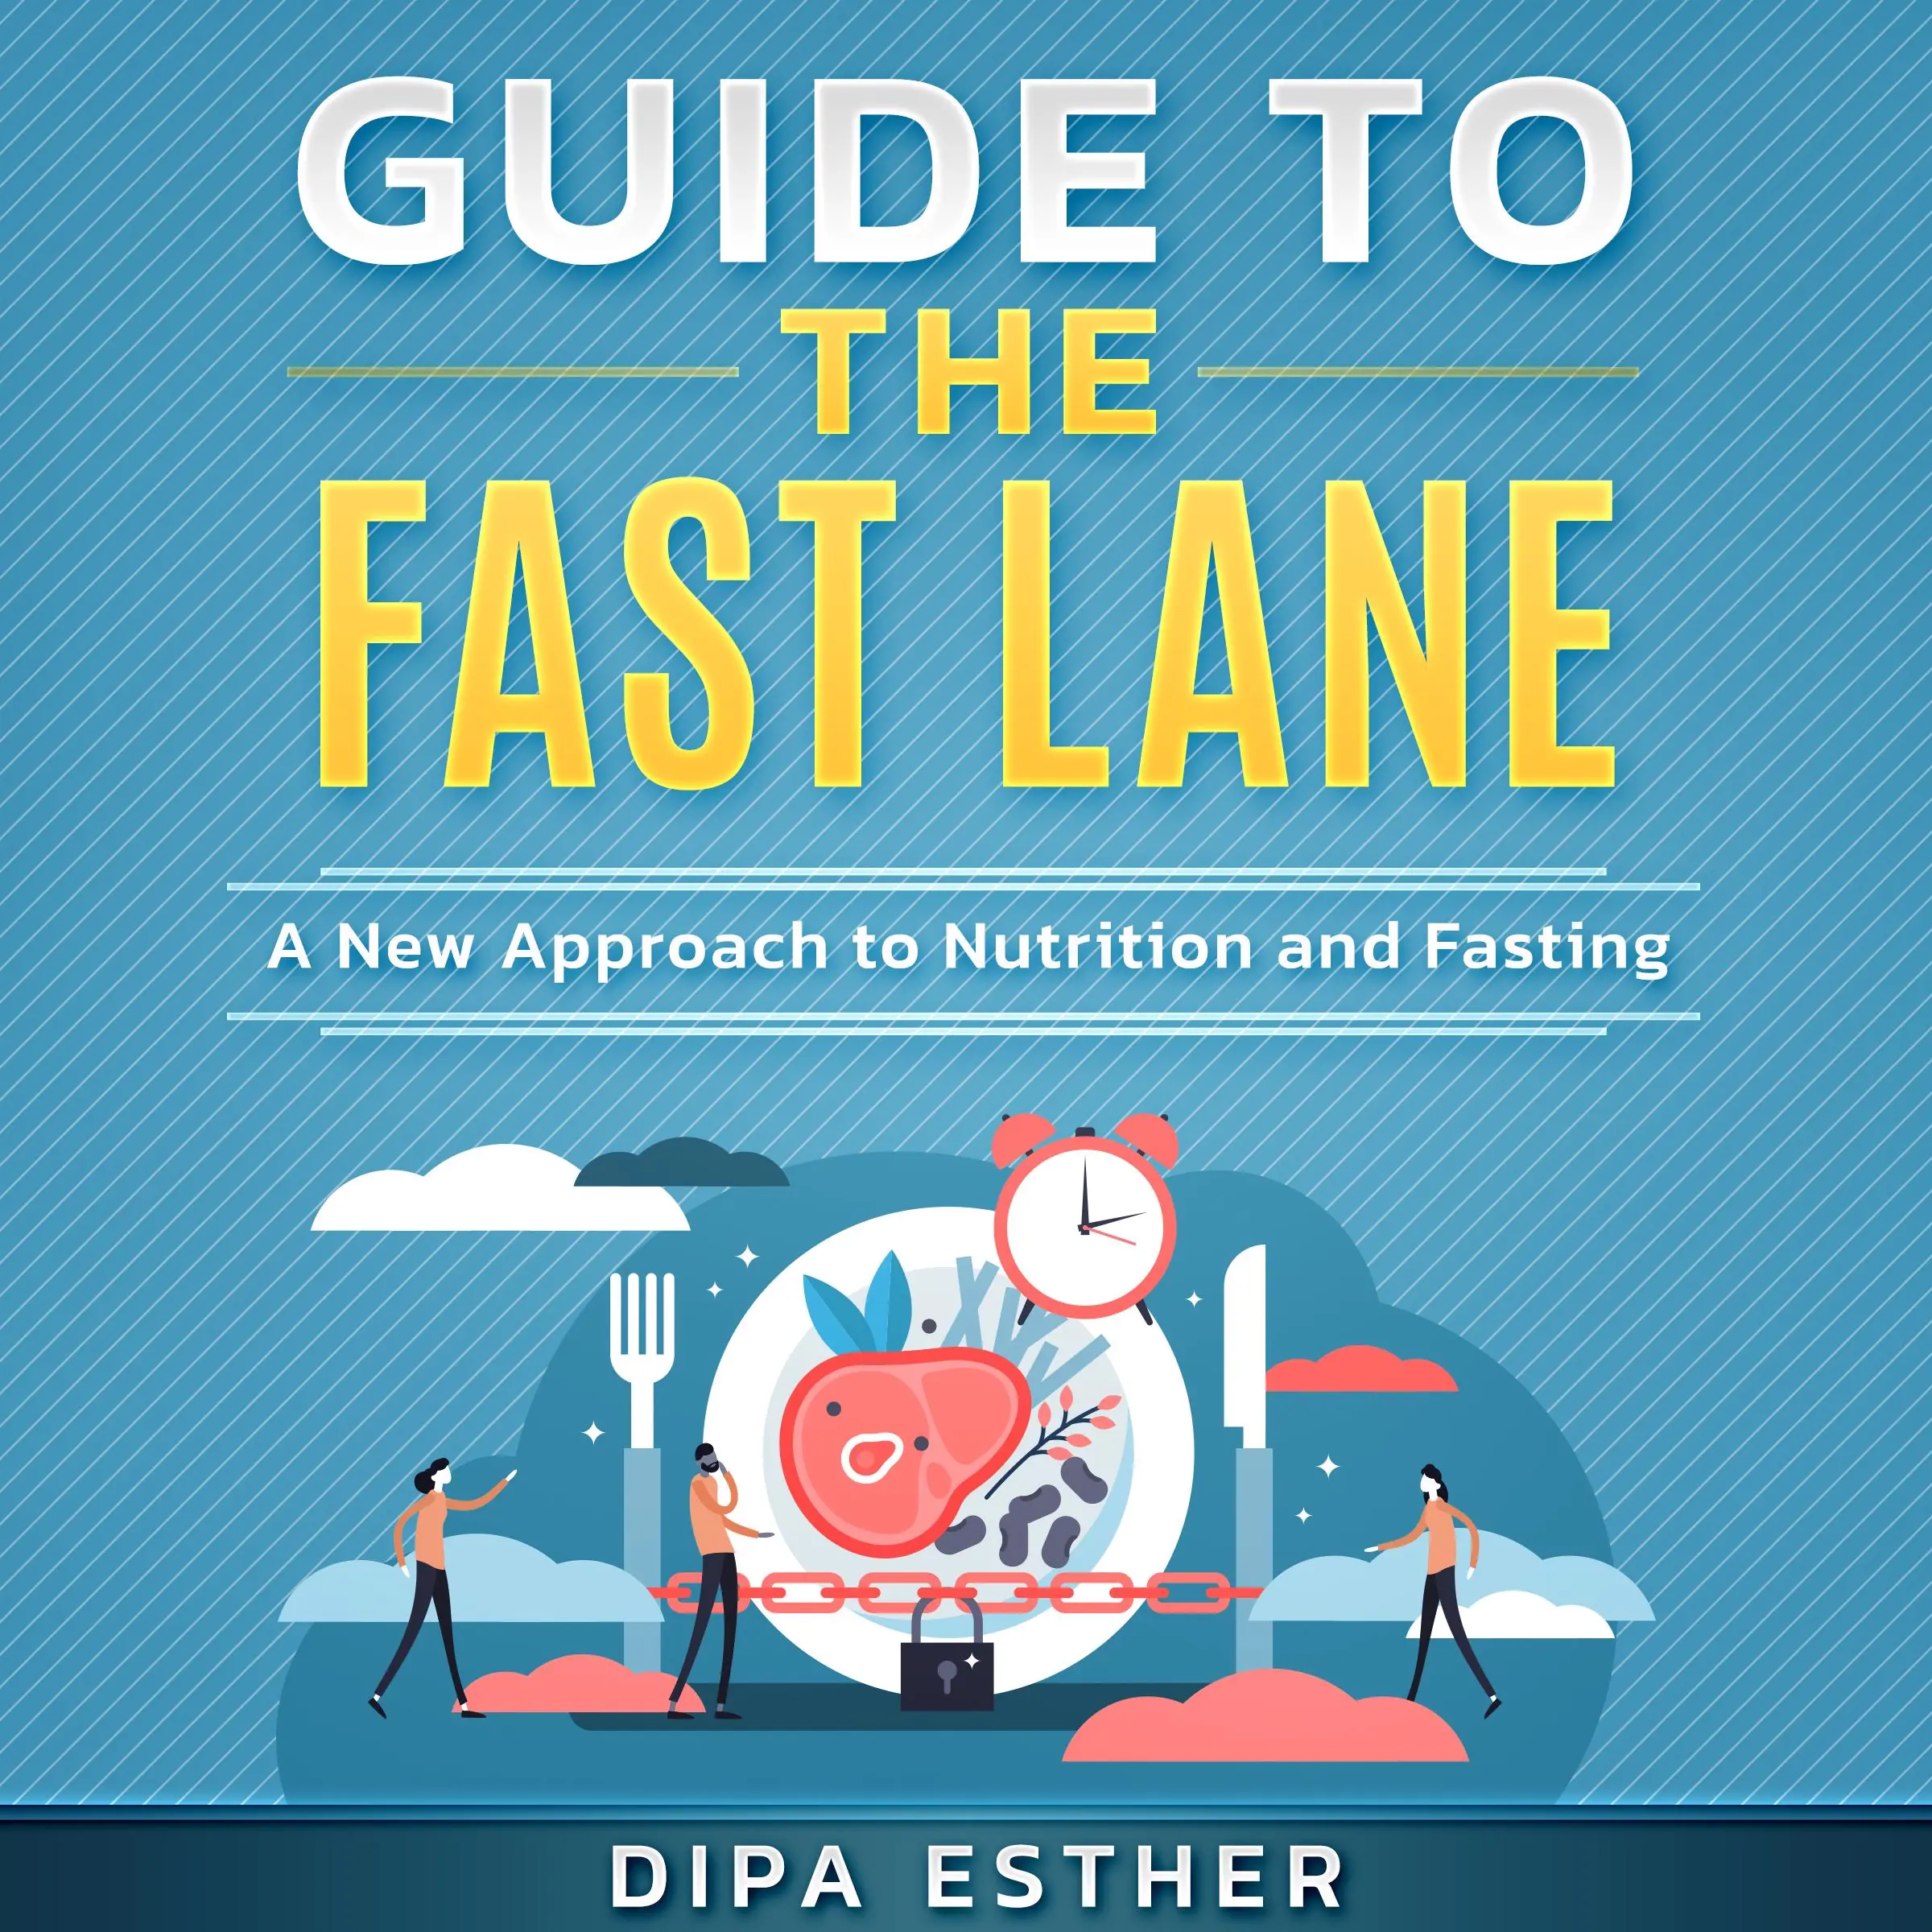 Guide to The Fast Lane Audiobook by Dipa Esther